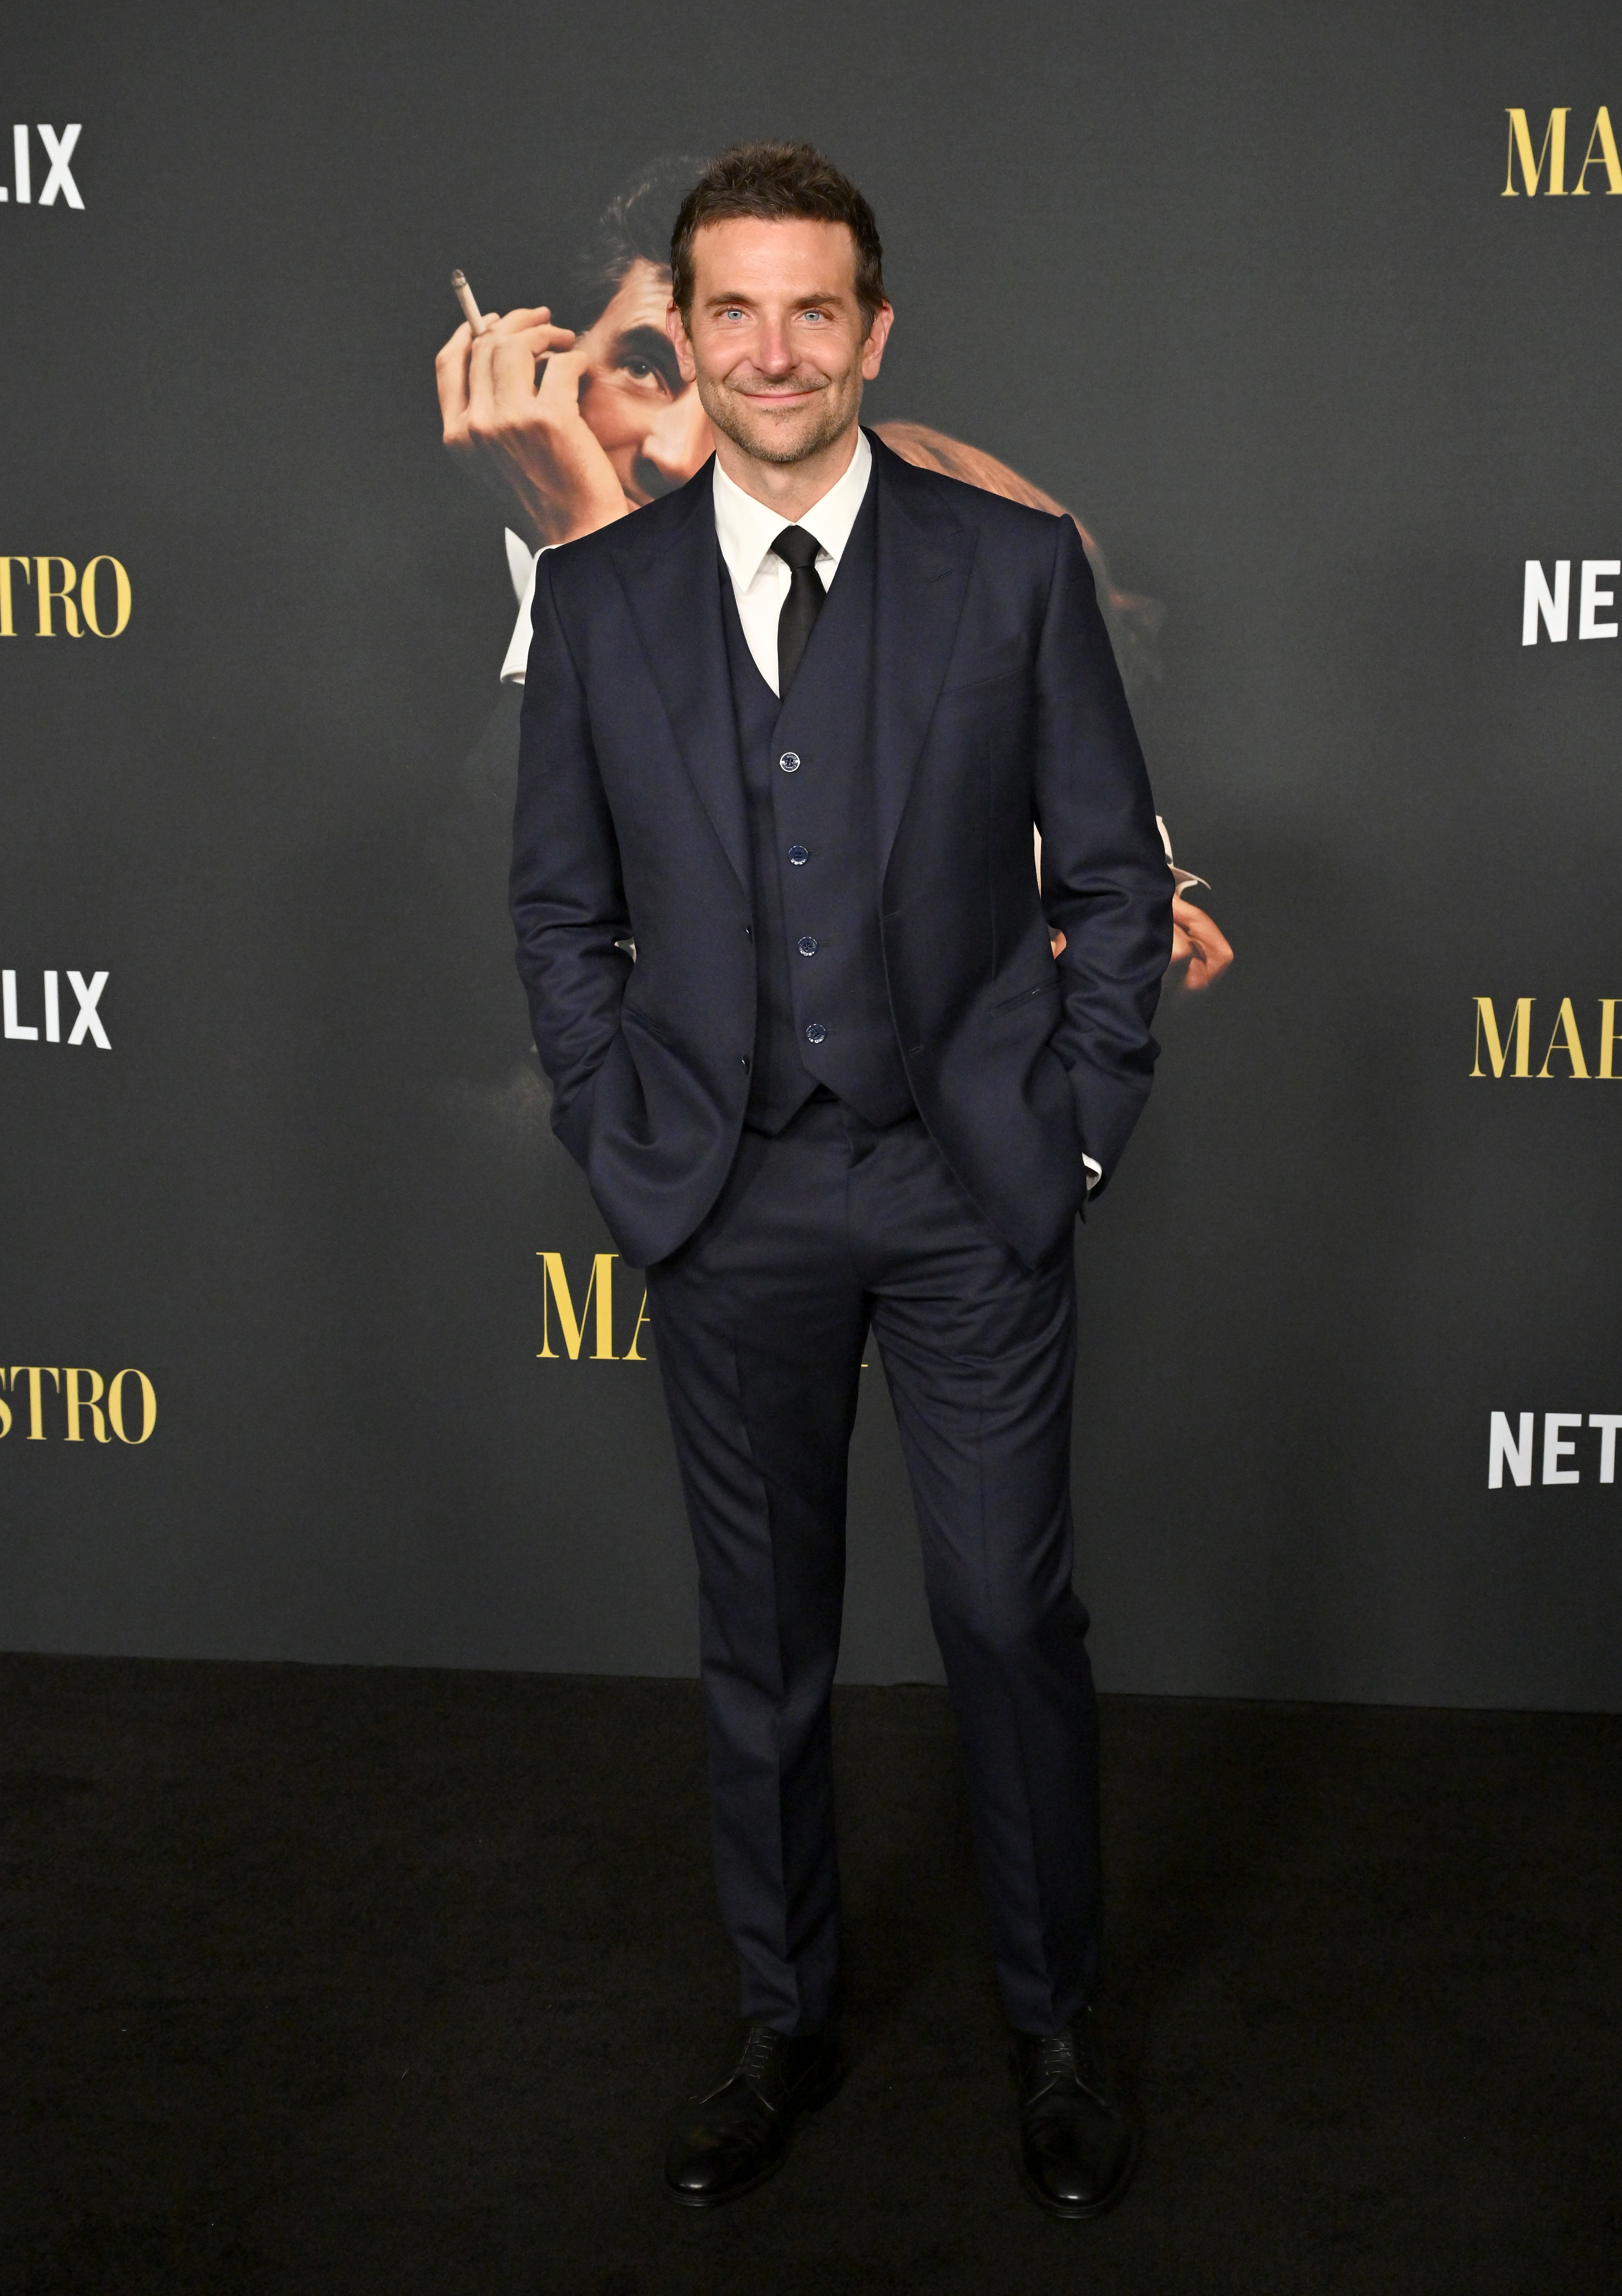 Bradley Cooper stands smiling in a tailored navy suit with a tie, at a Netflix event for &quot;Maestro&quot;